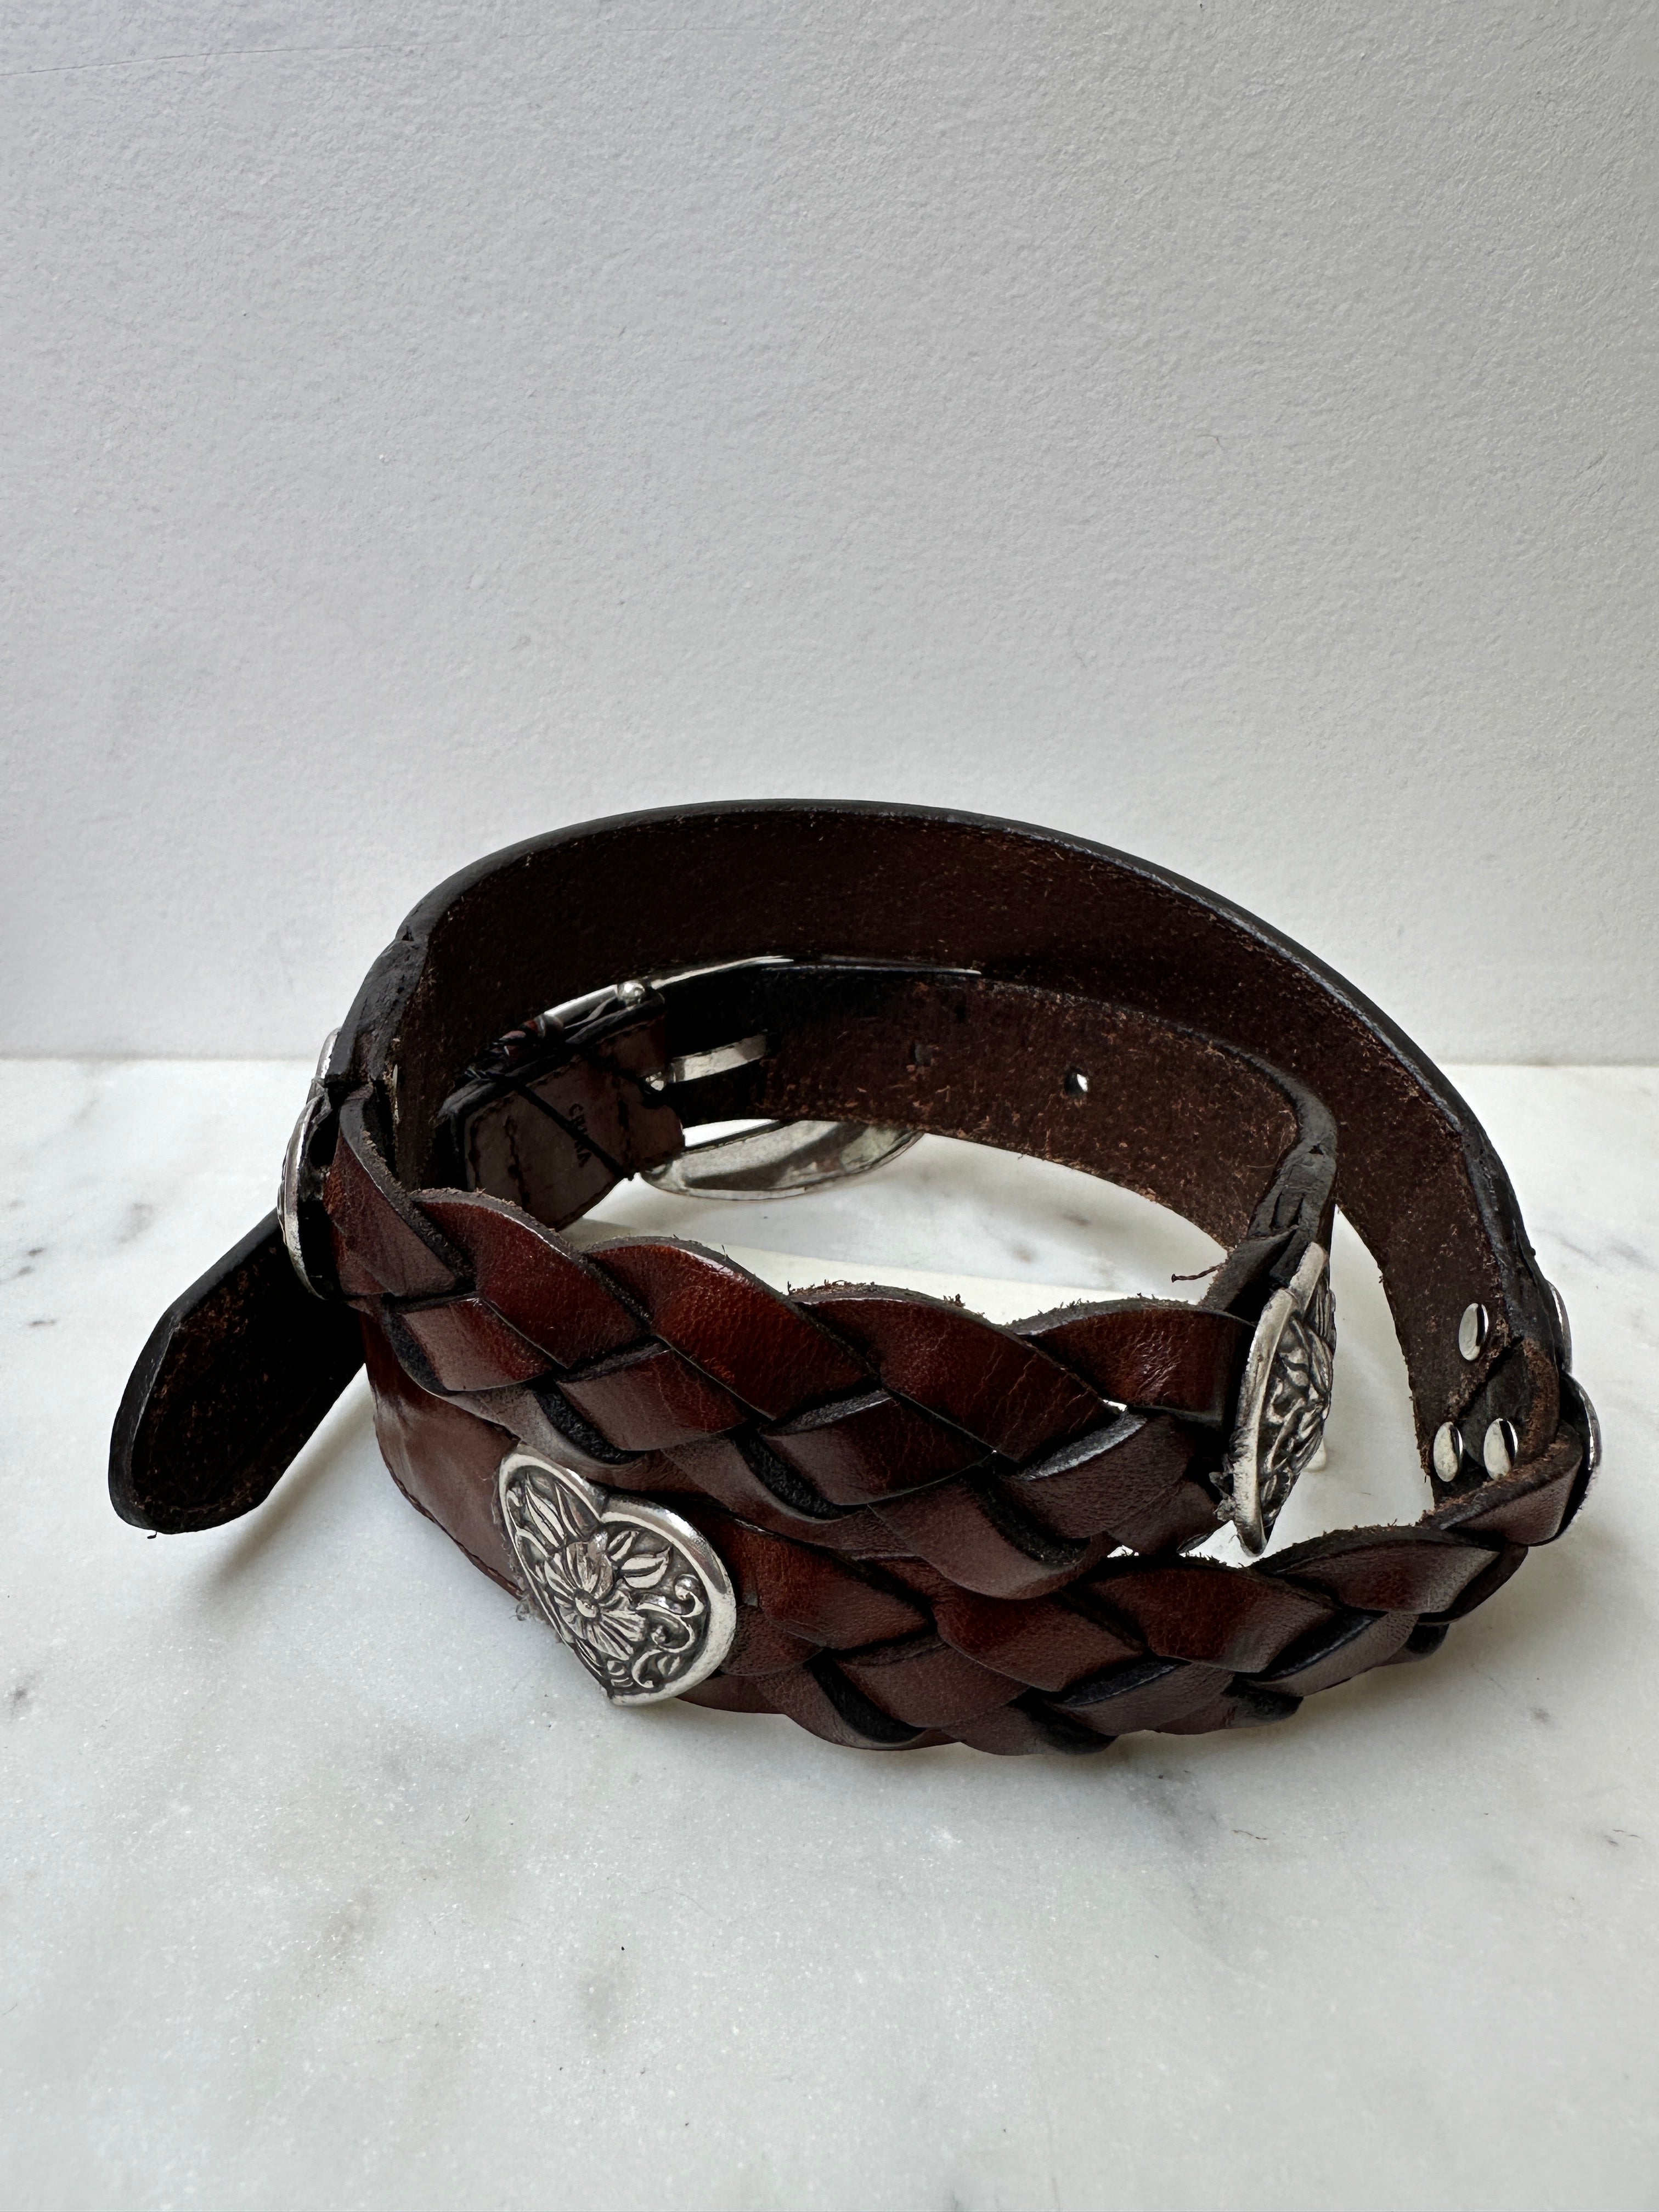 Future Nomads Belts 87cm Brown and Silver Woven Hearts Belt